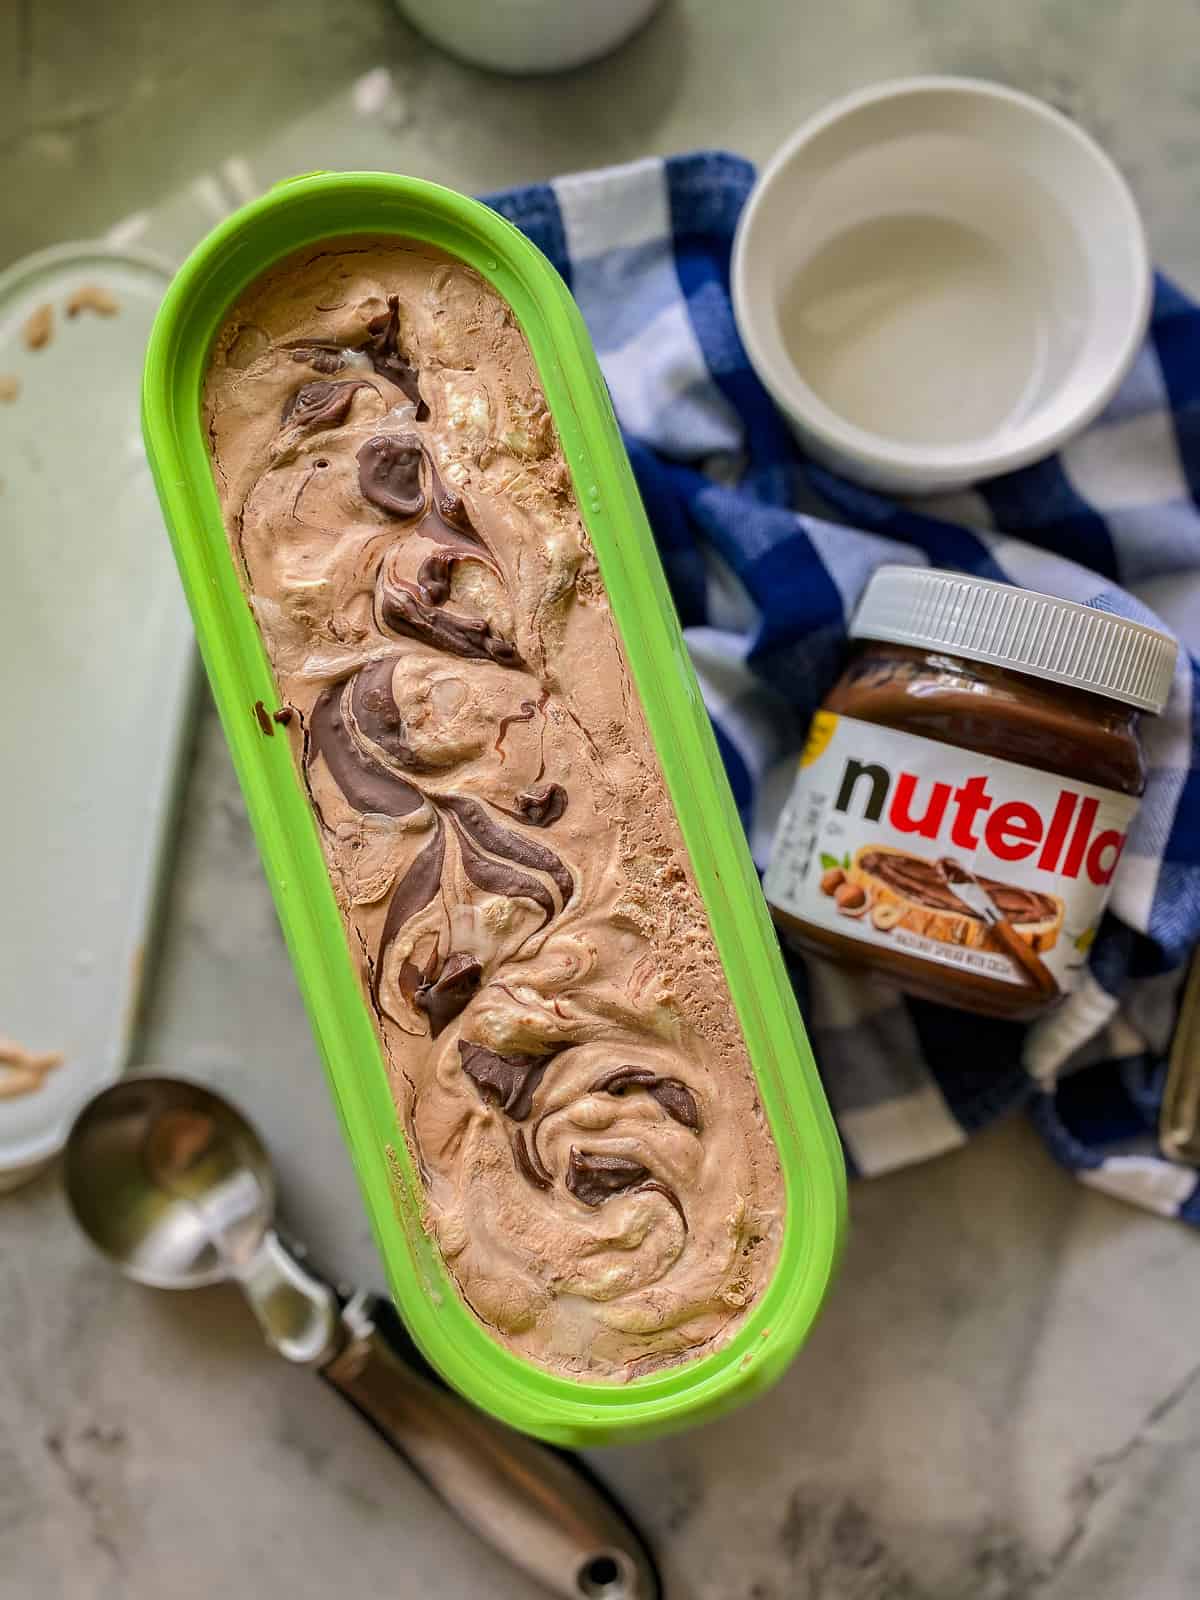 Green oval container with chocolate ice cream, ice cream scoop, and nutella container.